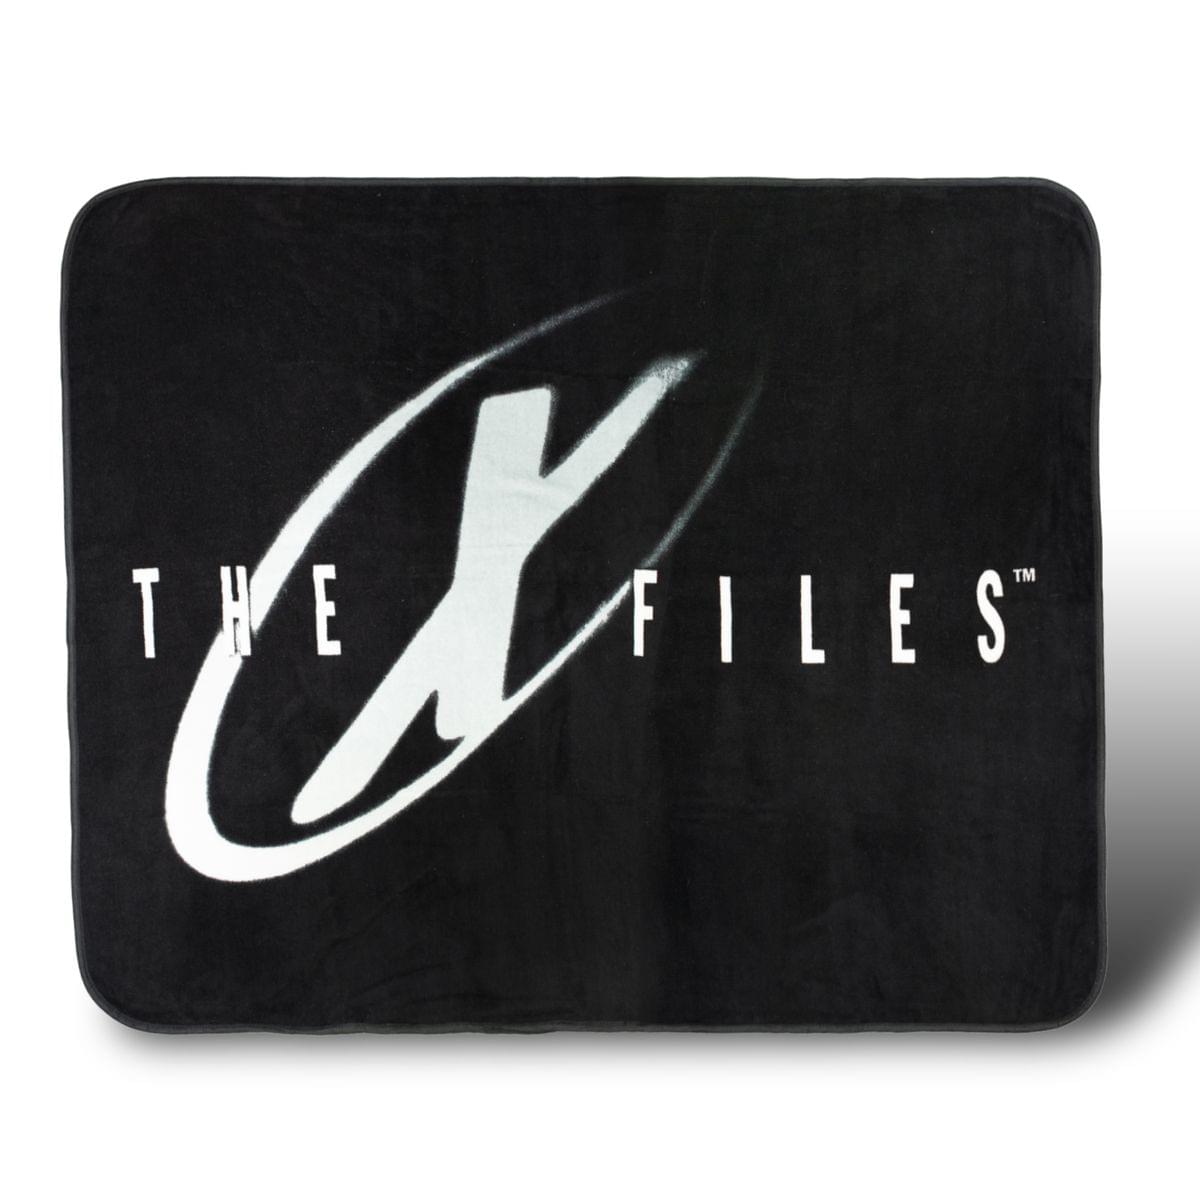 The X-Files I Want To Believe Lightweight Fleece Throw Blanket | 50 x 60 inches